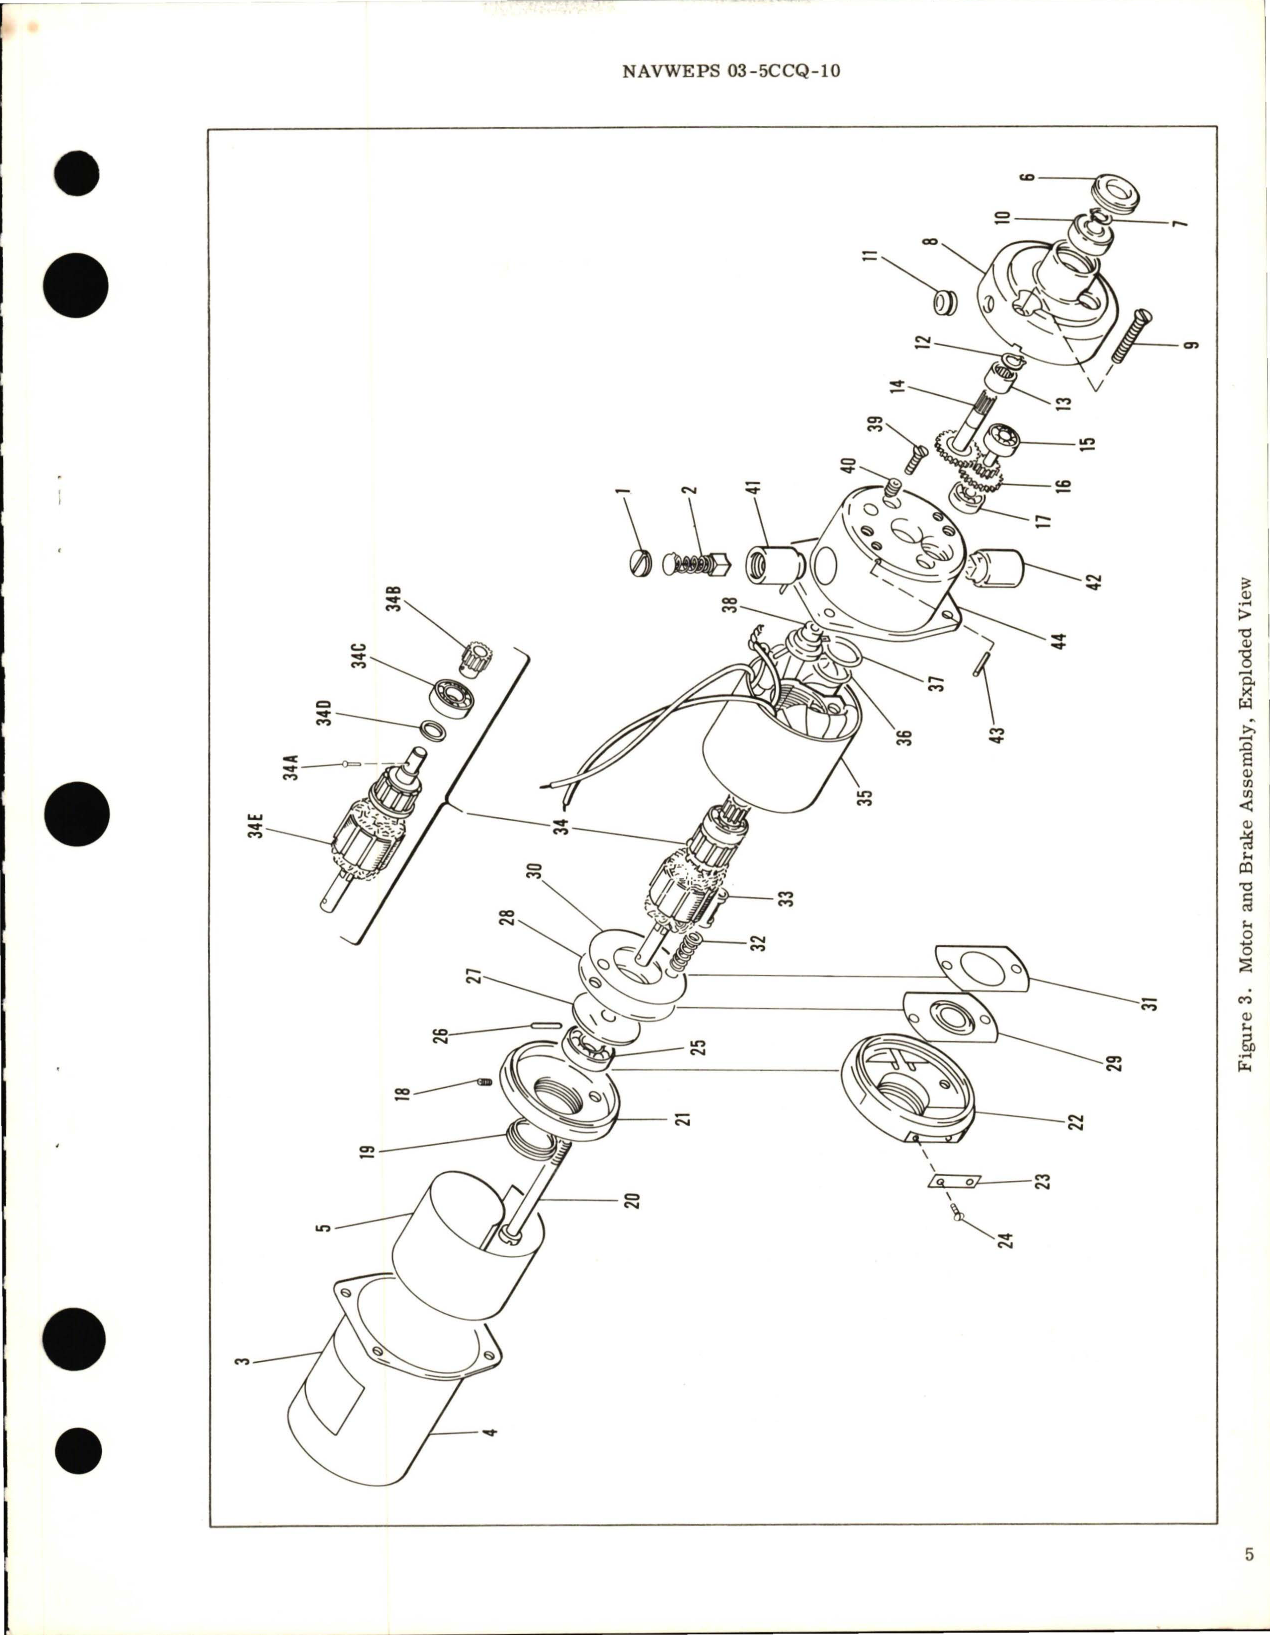 Sample page 5 from AirCorps Library document: Overhaul Instructions with Parts Breakdown for  Motor and Brake Assembly - E1600M16 Series